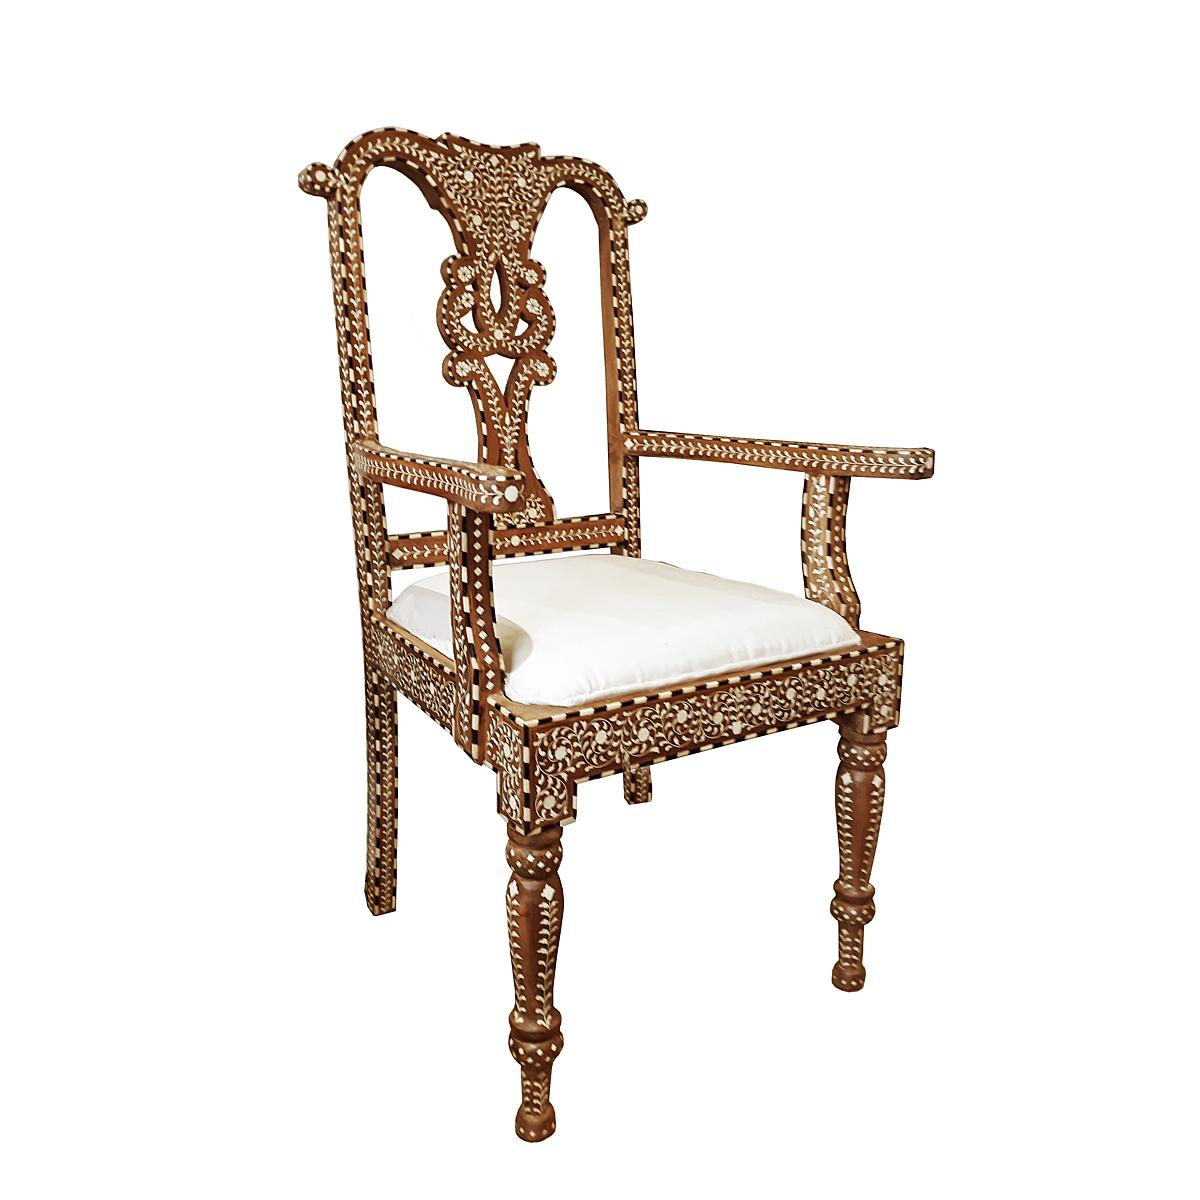 A beautiful armchair, handcrafted in India out of aged teak wood and cruelty-free sourced animal bone inlays. 

Inlay is ancient decorative technique that involves embedding delicate, hand-carved pieces of bone (in the beginnings it was ivory or